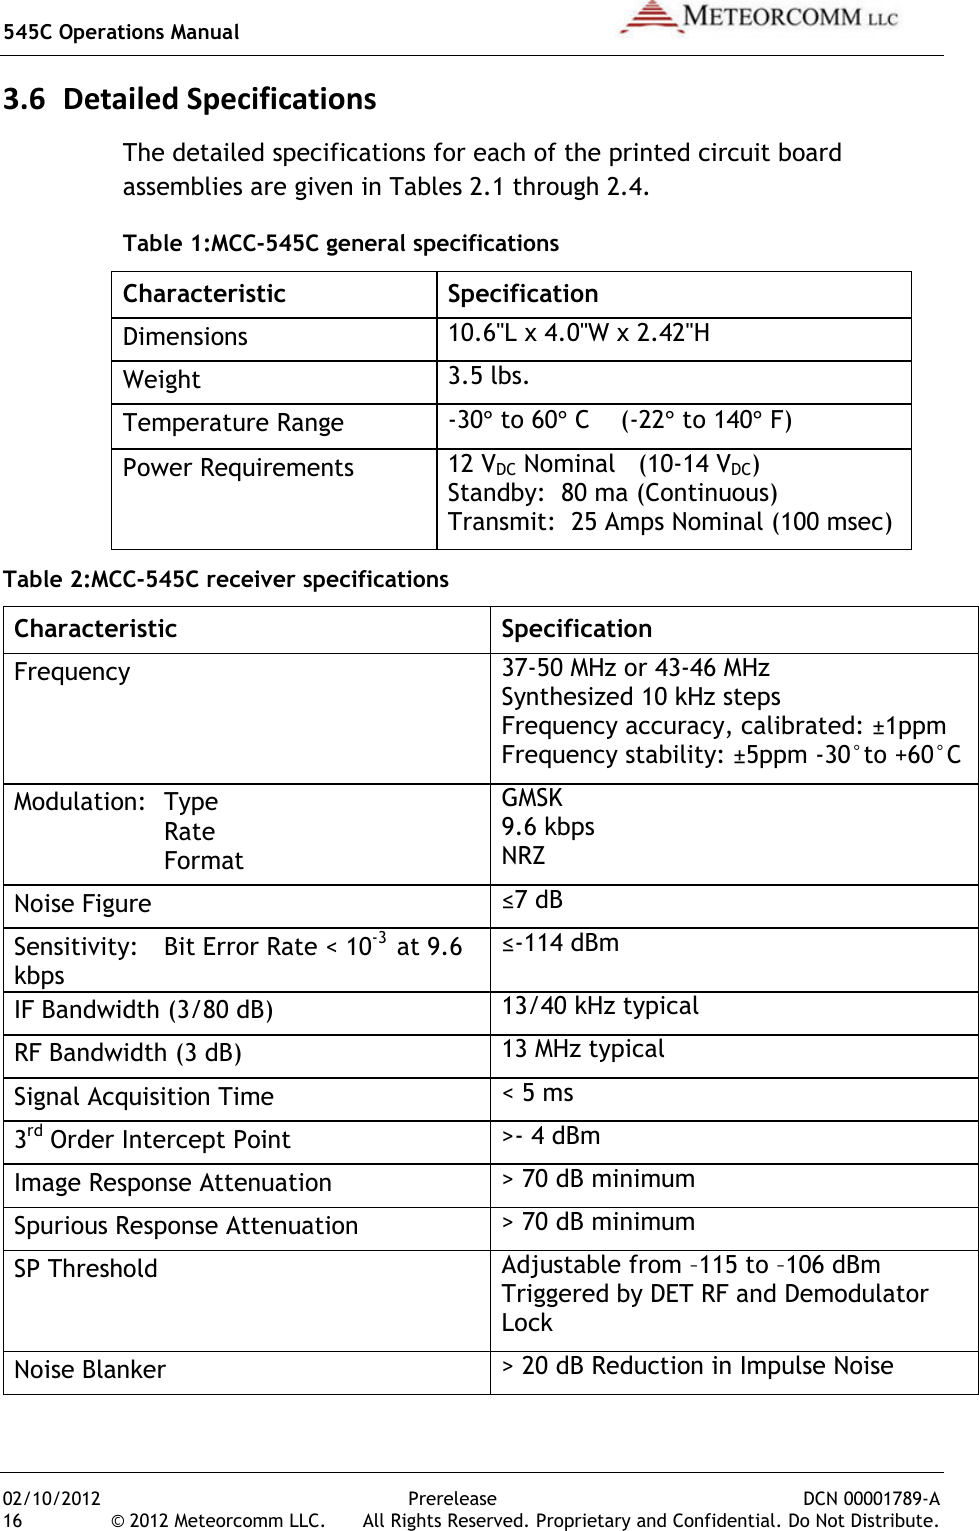 545C Operations Manual   02/10/2012  Prerelease  DCN 00001789-A 16  © 2012 Meteorcomm LLC.   All Rights Reserved. Proprietary and Confidential. Do Not Distribute. 3.6 Detailed Specifications The detailed specifications for each of the printed circuit board assemblies are given in Tables 2.1 through 2.4. Table 1:MCC-545C general specifications Characteristic  Specification Dimensions 10.6&quot;L x 4.0&quot;W x 2.42&quot;H Weight 3.5 lbs. Temperature Range -30° to 60° C    (-22° to 140° F) Power Requirements 12 VDC Nominal   (10-14 VDC) Standby:  80 ma (Continuous) Transmit:  25 Amps Nominal (100 msec) Table 2:MCC-545C receiver specifications Characteristic  Specification Frequency 37-50 MHz or 43-46 MHz  Synthesized 10 kHz steps Frequency accuracy, calibrated: ±1ppm Frequency stability: ±5ppm -30°to +60°C Modulation:  Type     Rate     Format GMSK 9.6 kbps NRZ Noise Figure ≤7 dB  Sensitivity:   Bit Error Rate &lt; 10-3  at 9.6 kbps ≤-114 dBm IF Bandwidth (3/80 dB) 13/40 kHz typical RF Bandwidth (3 dB) 13 MHz typical Signal Acquisition Time &lt; 5 ms 3rd Order Intercept Point &gt;- 4 dBm Image Response Attenuation &gt; 70 dB minimum Spurious Response Attenuation &gt; 70 dB minimum SP Threshold    Adjustable from –115 to –106 dBm Triggered by DET RF and Demodulator Lock Noise Blanker &gt; 20 dB Reduction in Impulse Noise 